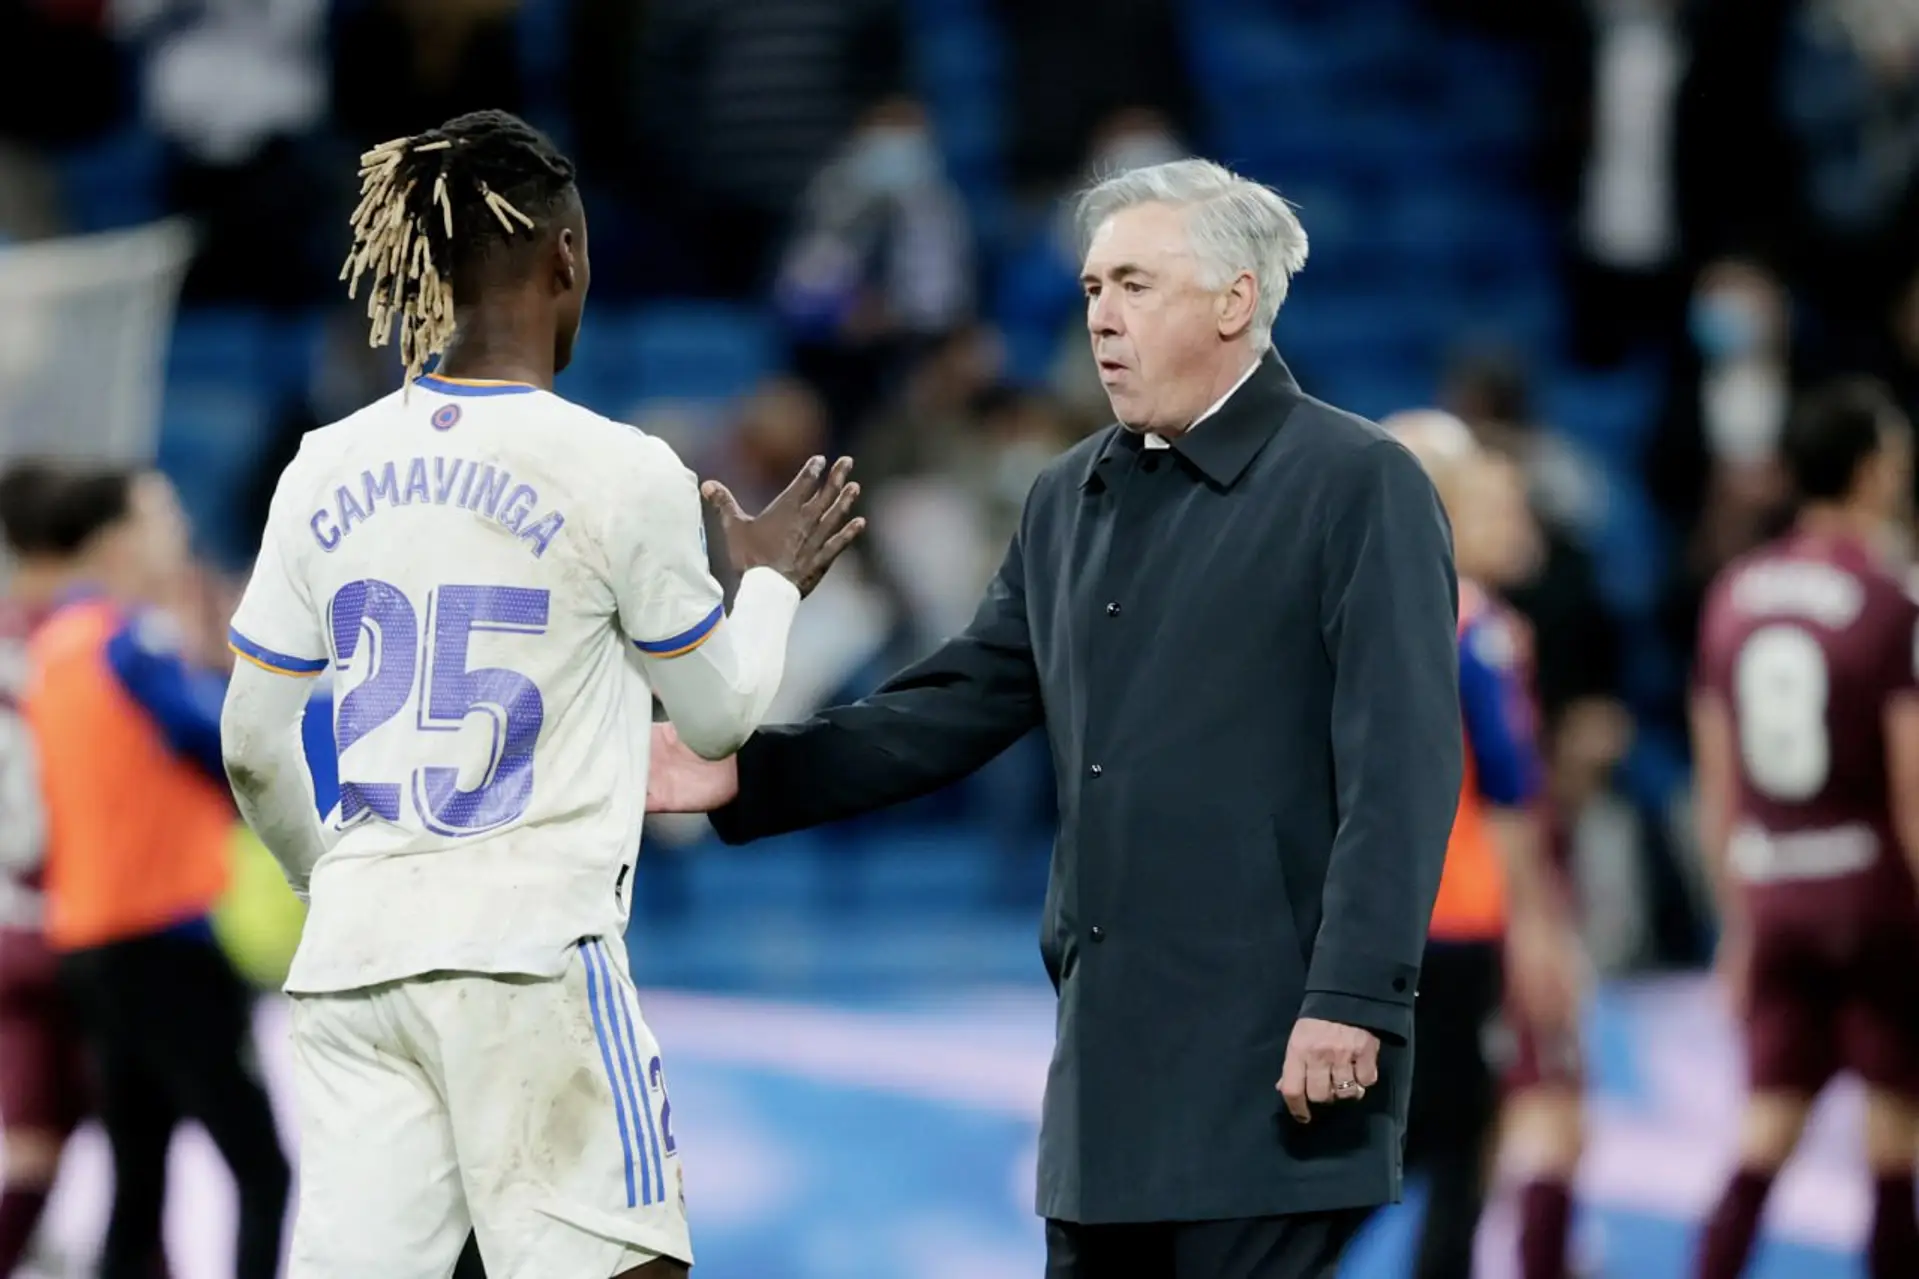 Camavinga isn't perfect but there's a midfielder at Madrid who can be his mentor - it's not Luka